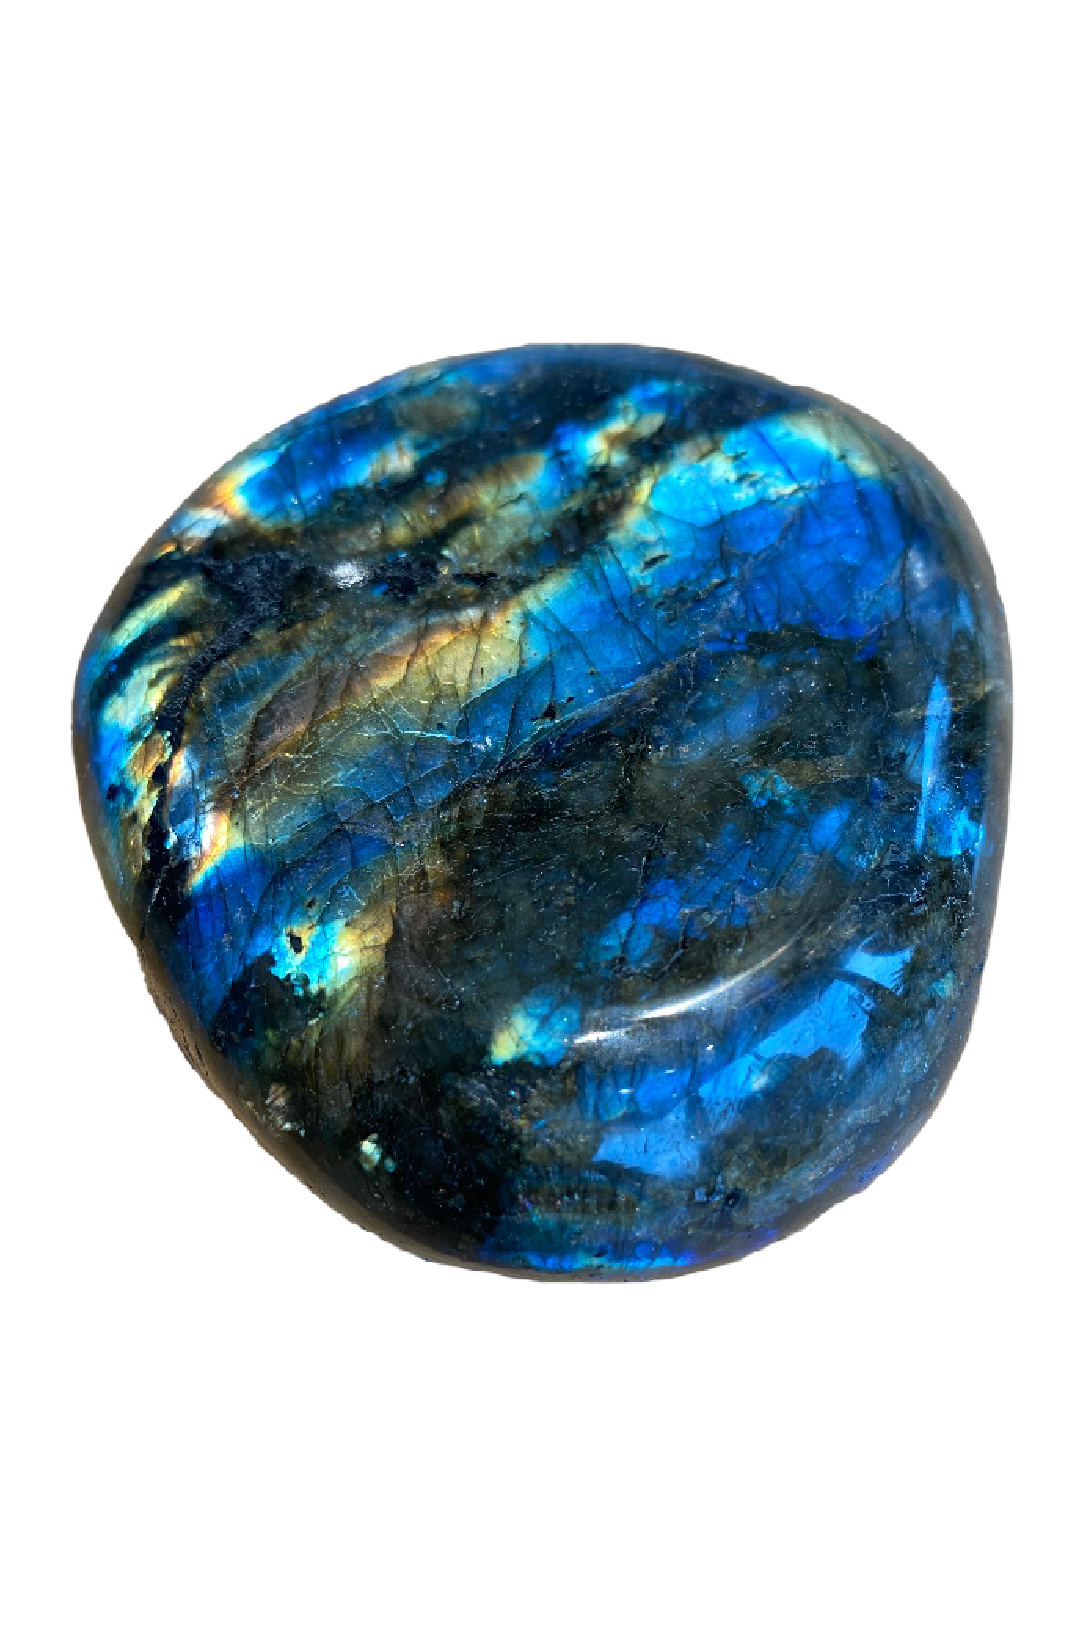 Stunning circular labradorite piece with a base grey and flashes of blue and green